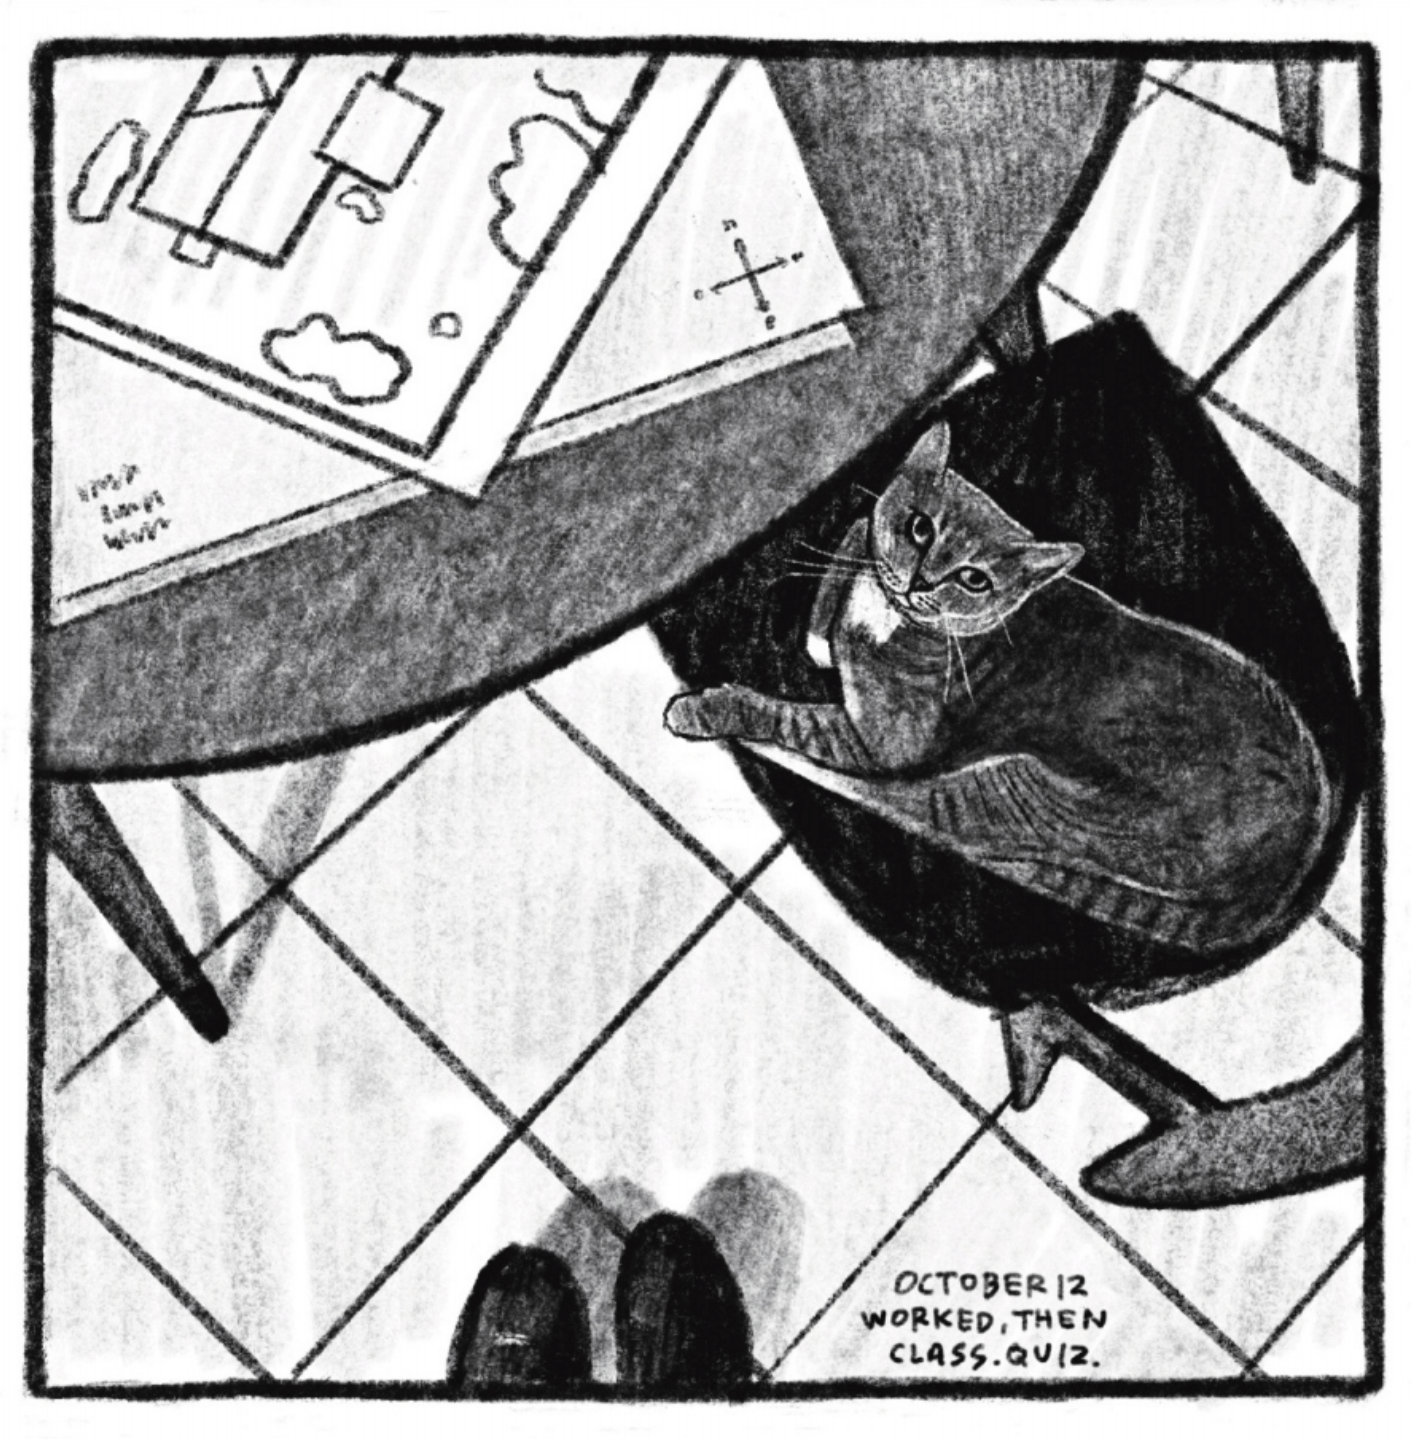 Another view from Kimâ€™s POV: We are looking down at a table spread with maps, and her cat who is lying in a chair at the table and looking up at her. â€œOctober 12. Worked, then class. Quiz.â€